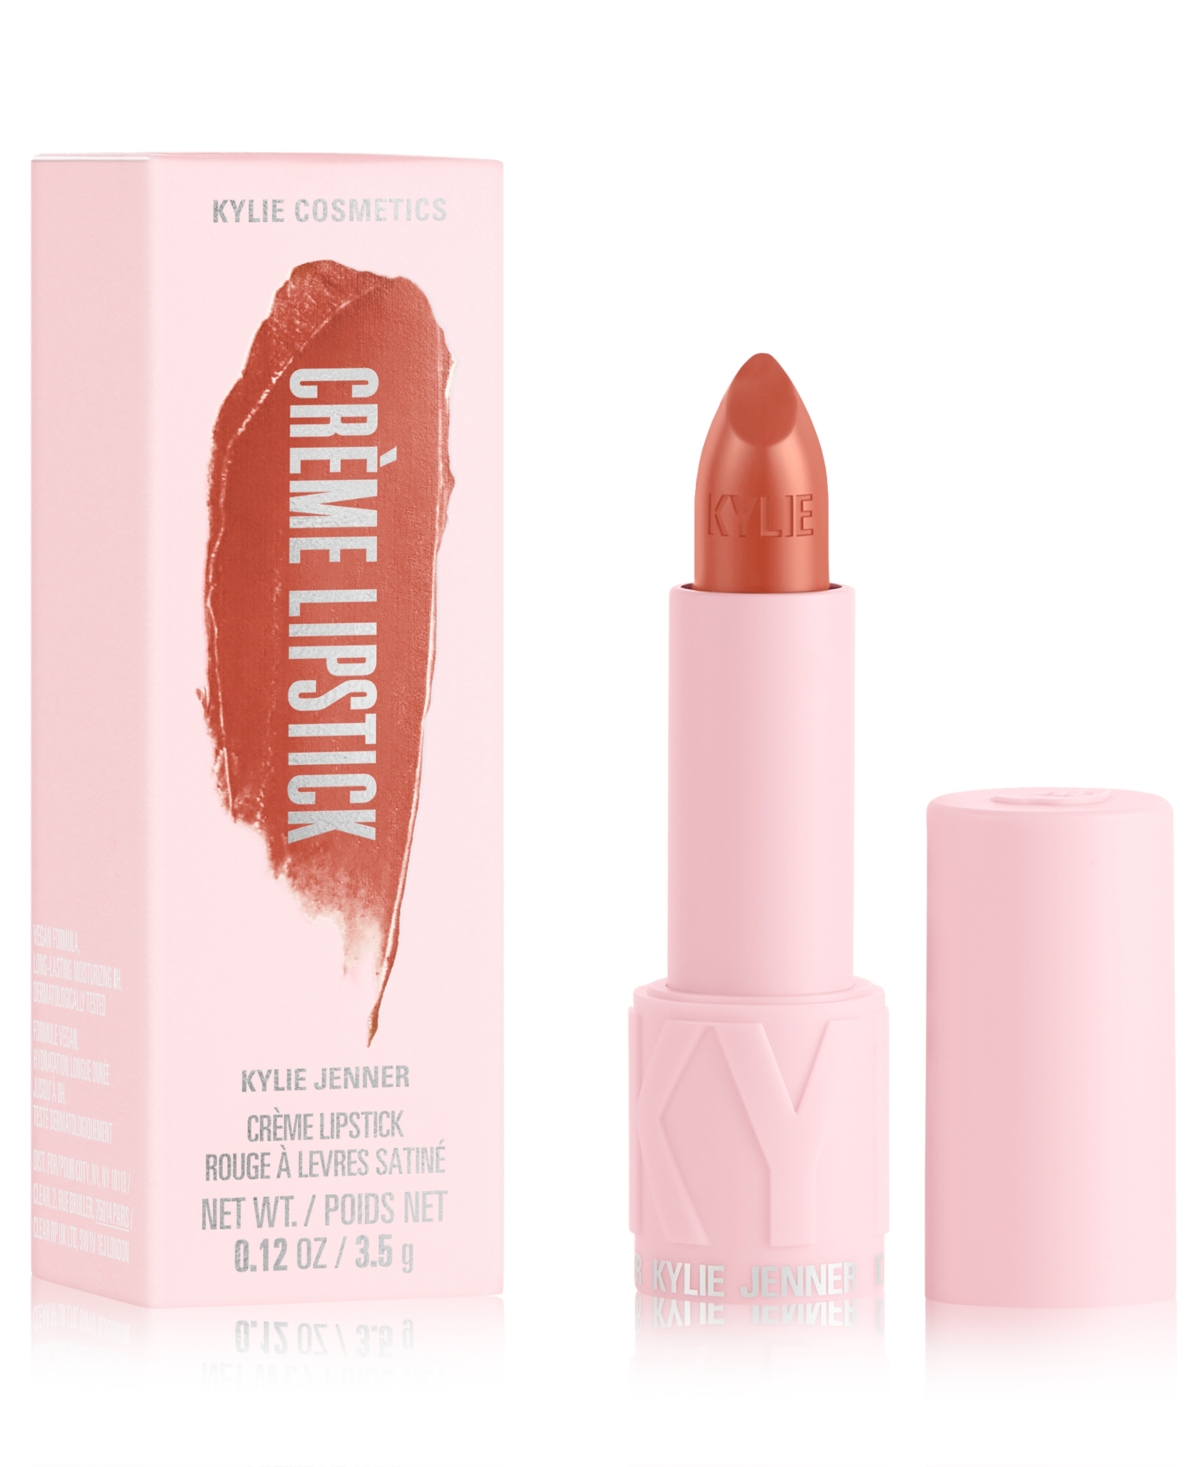 Kylie Cosmetics Creme Lipstick In Better Late Than Never